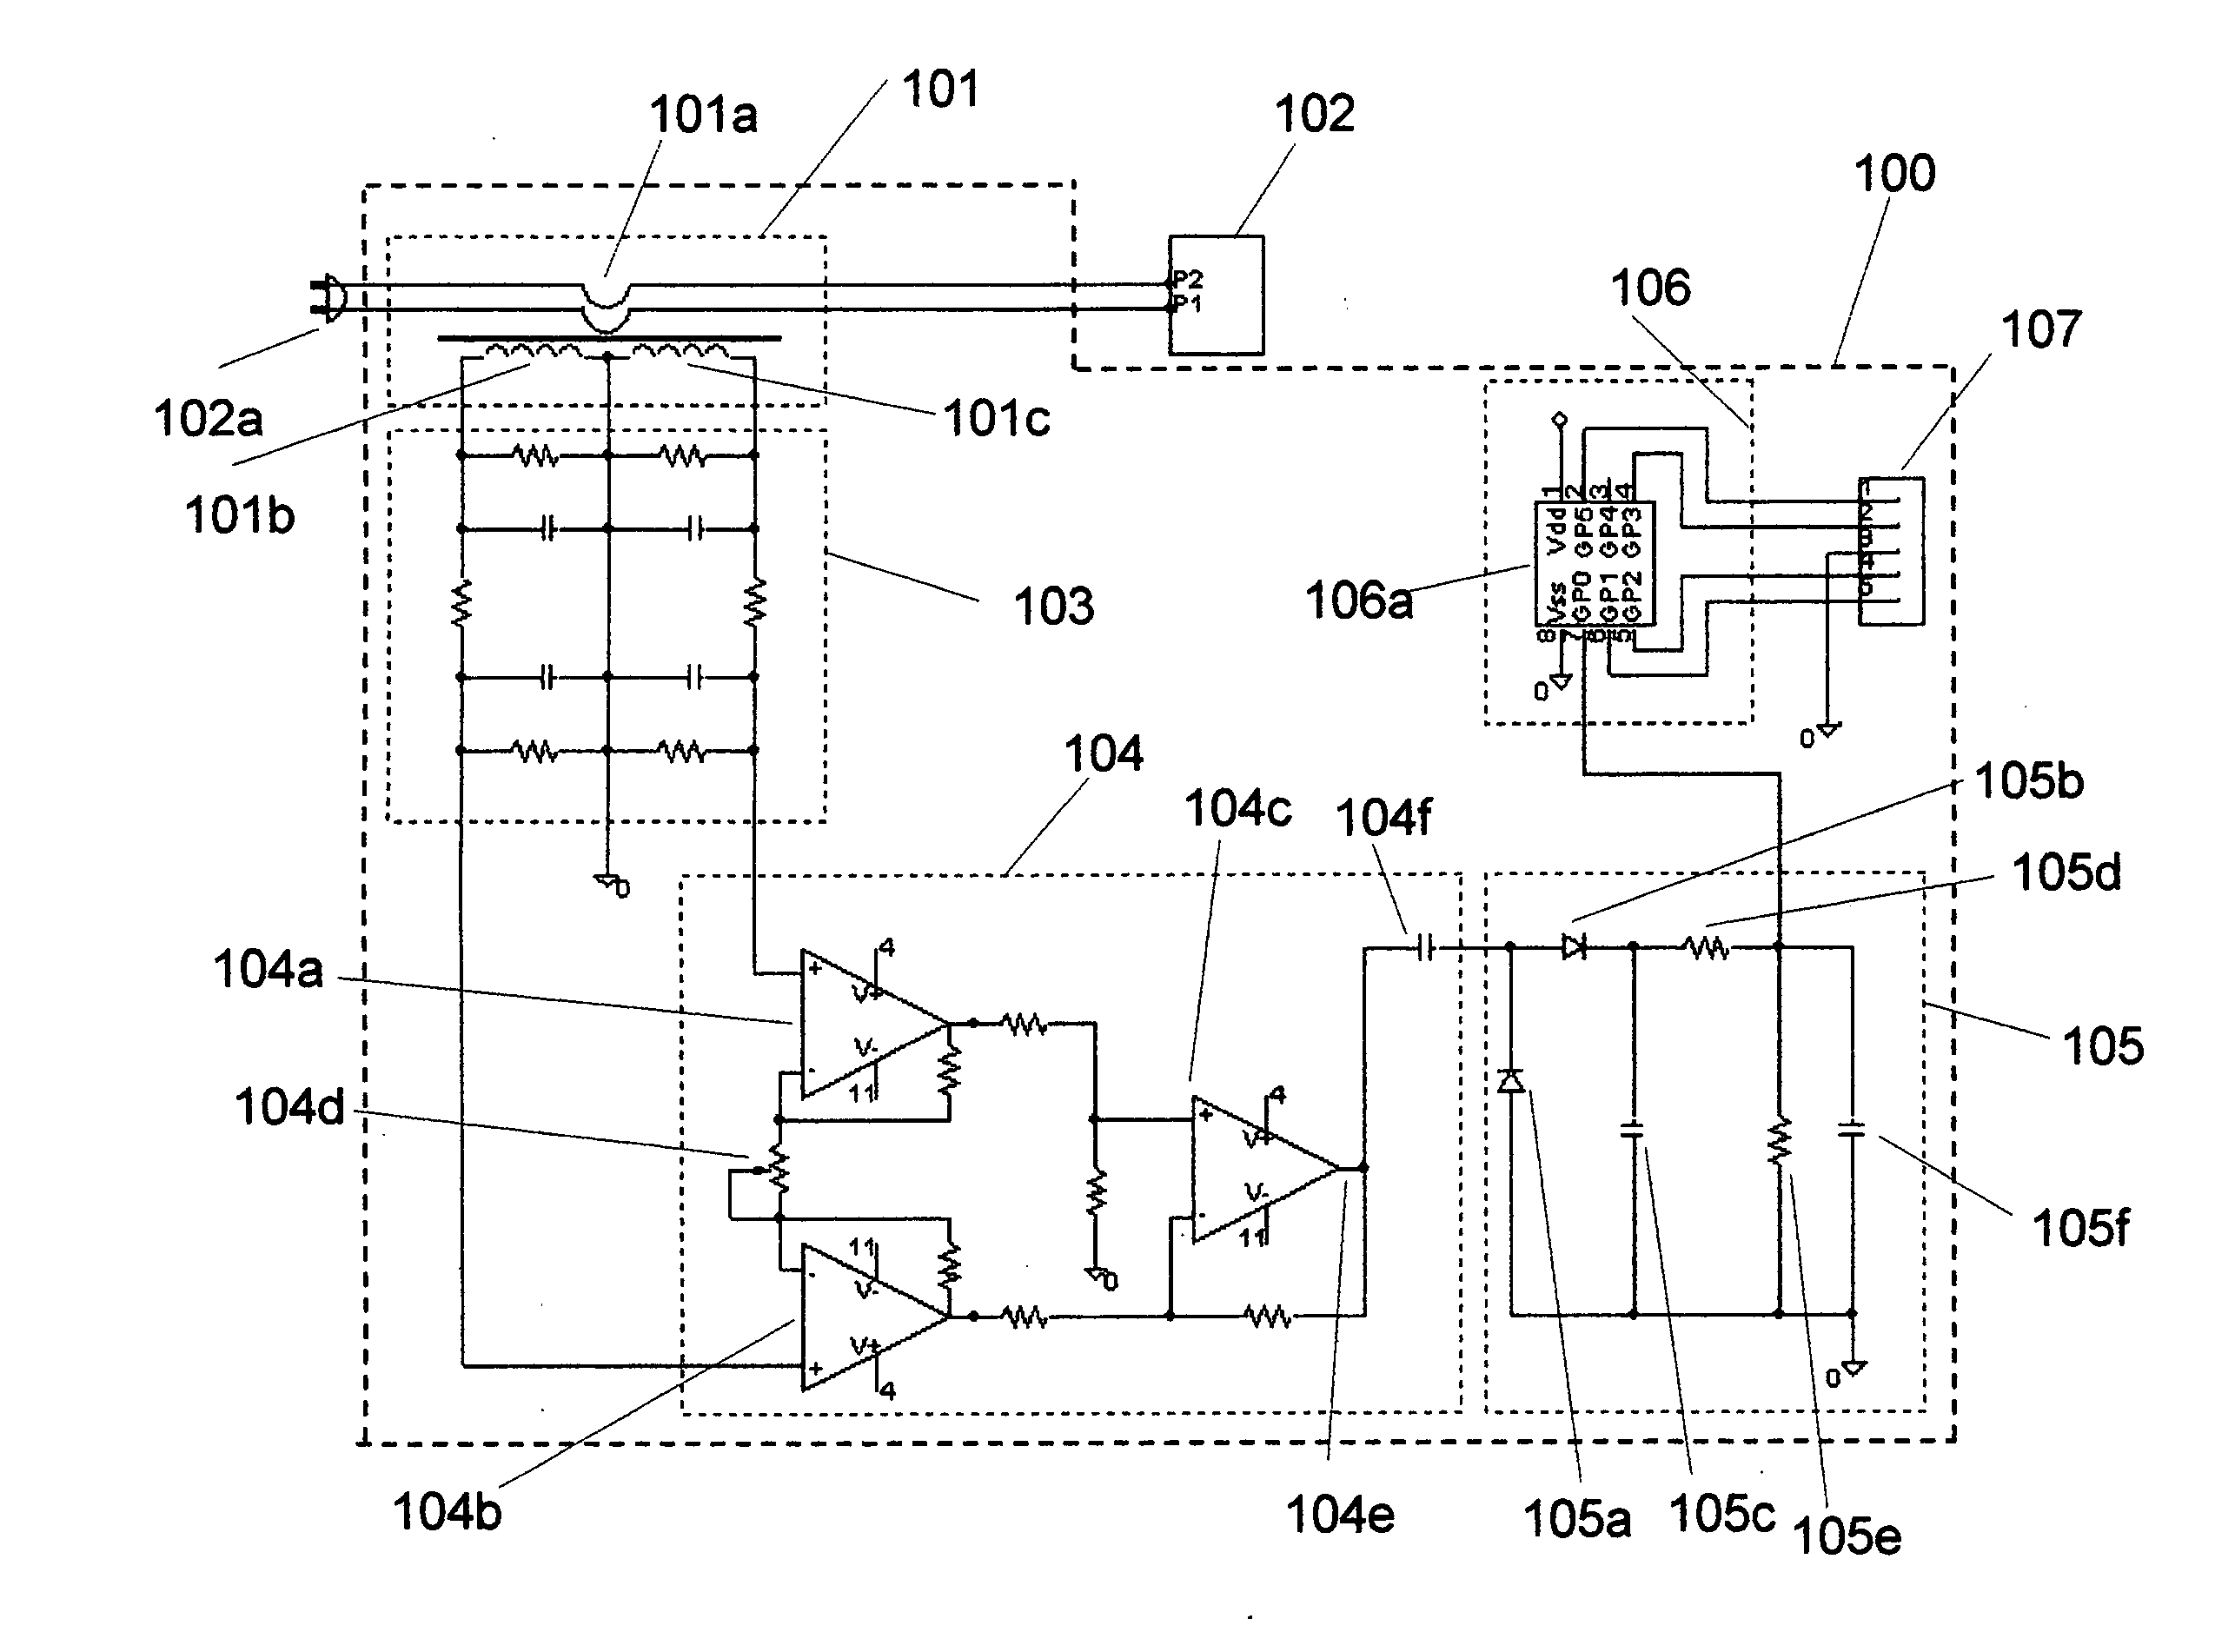 Electronic judging apparatus for working state of the equipment